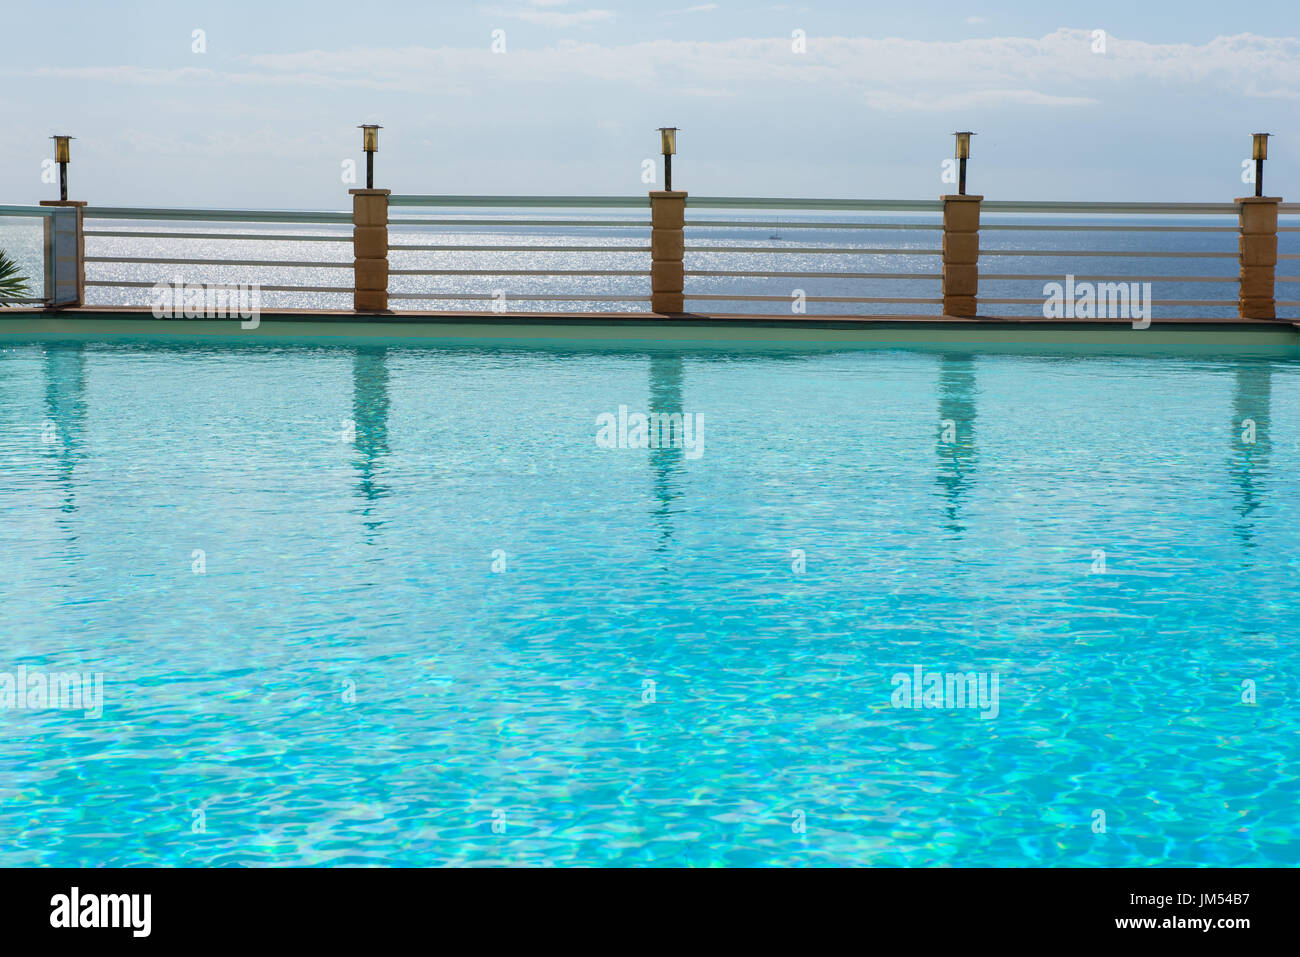 Look of the pool with turquoise-coloured water on the Mediterranean Sea Stock Photo